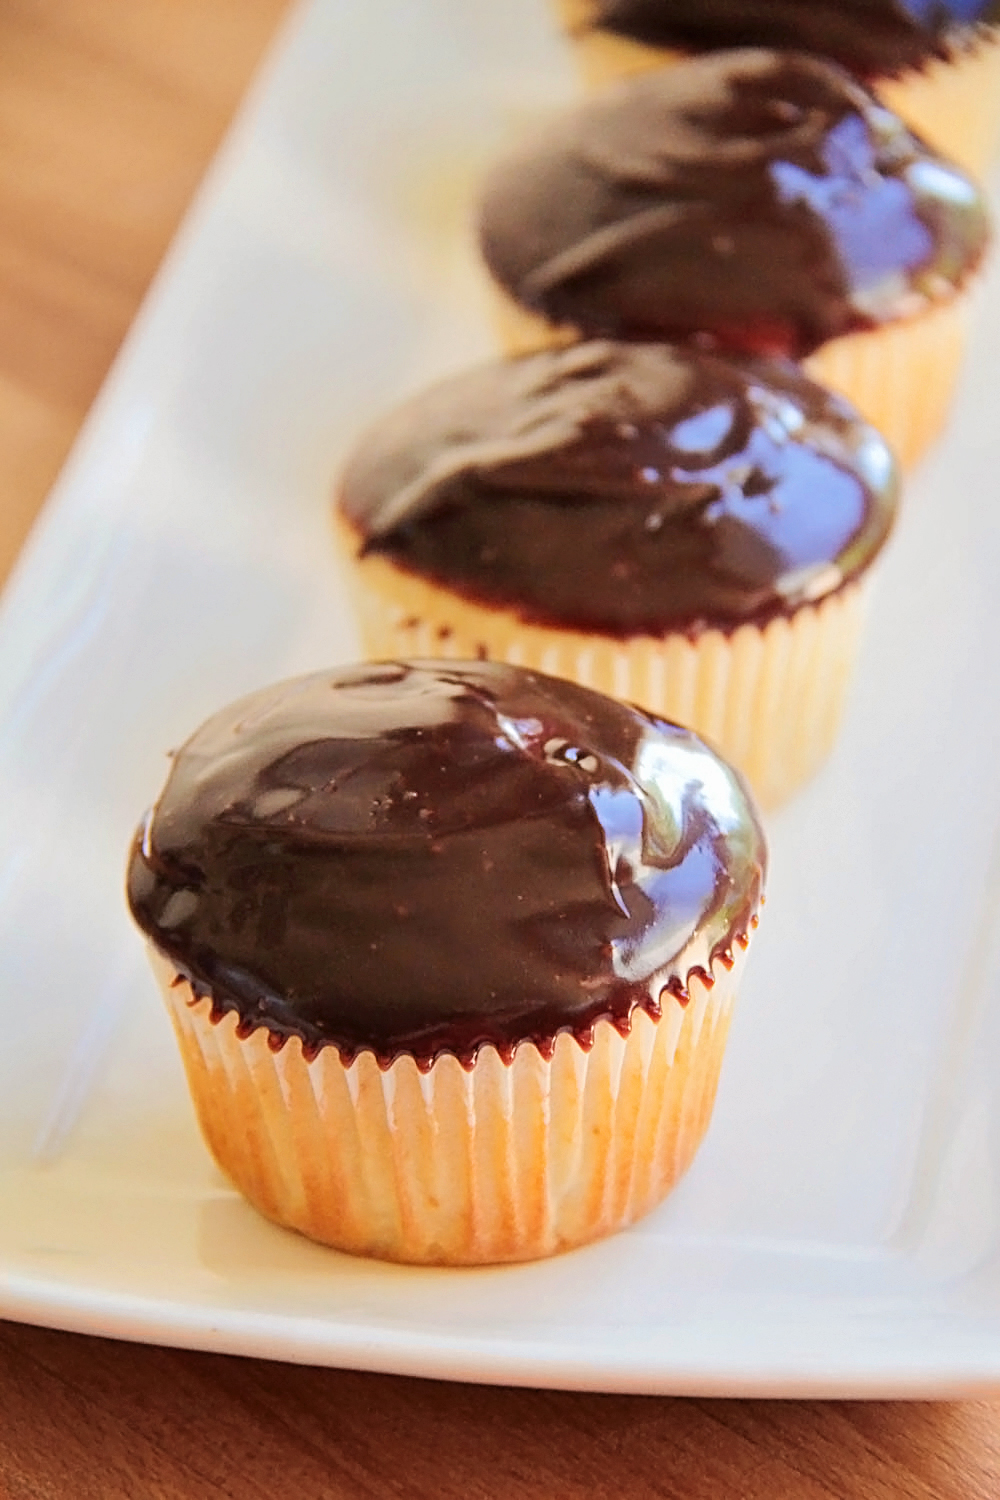 These luscious and delicious Boston cream pie cupcakes are so fun to make, and gorgeous too!